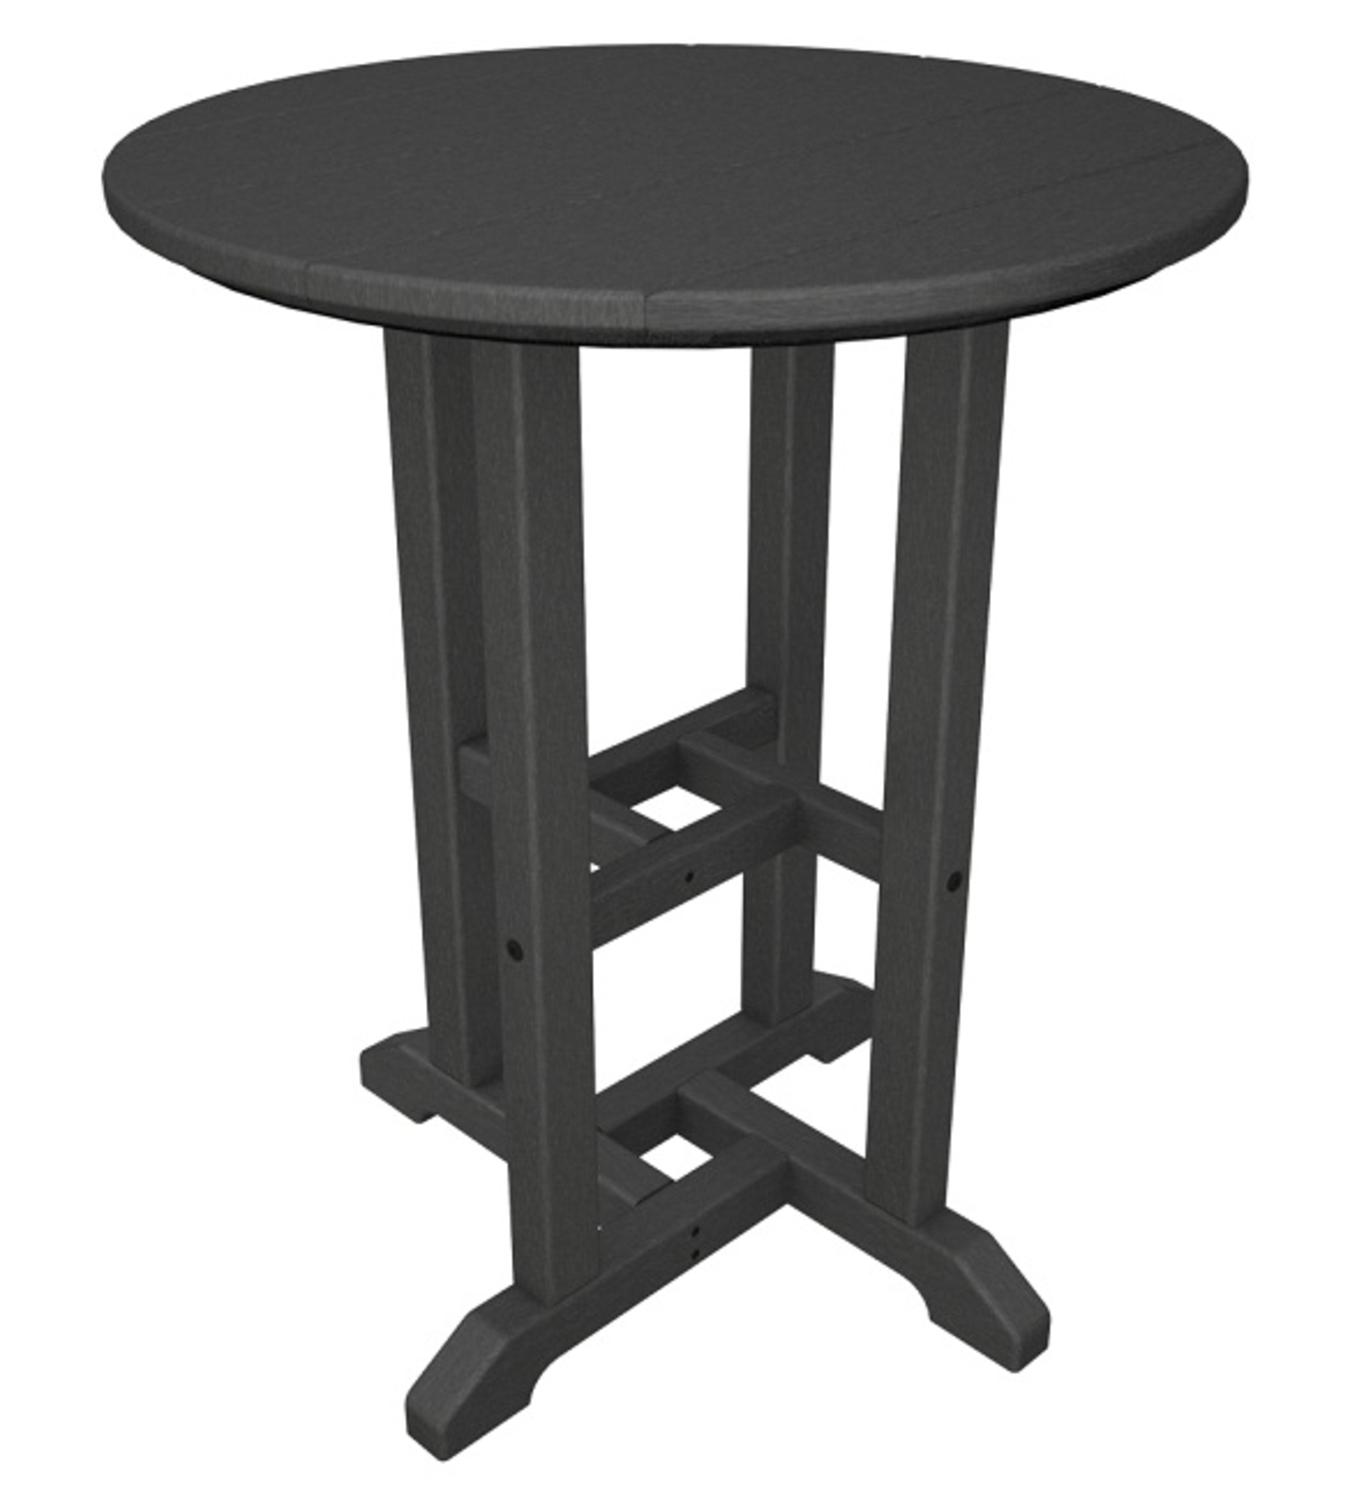 Eco-Friendly Furnishings  29" Recycled Earth-Friendly Outdoor Patio Small Round Dinner Table - Slate Gray